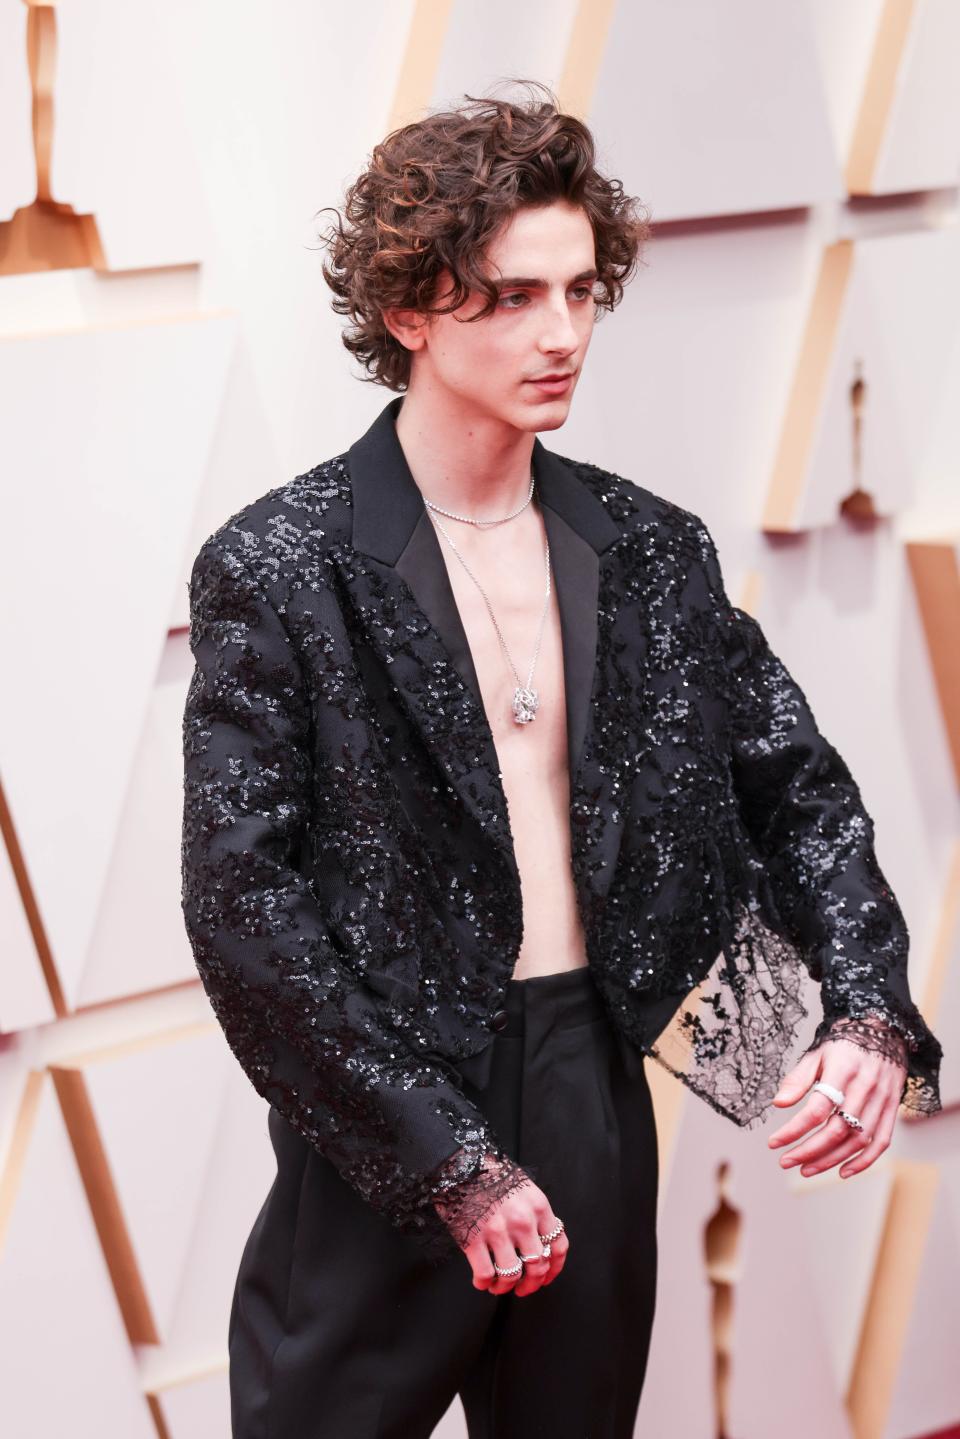 Timothee in a sequin bedazzled cropped suit jacket with black lace on the arm cuffs and around the waist of the jacket. He has no shirt on and two silver necklaces. He's wearing black trousers.